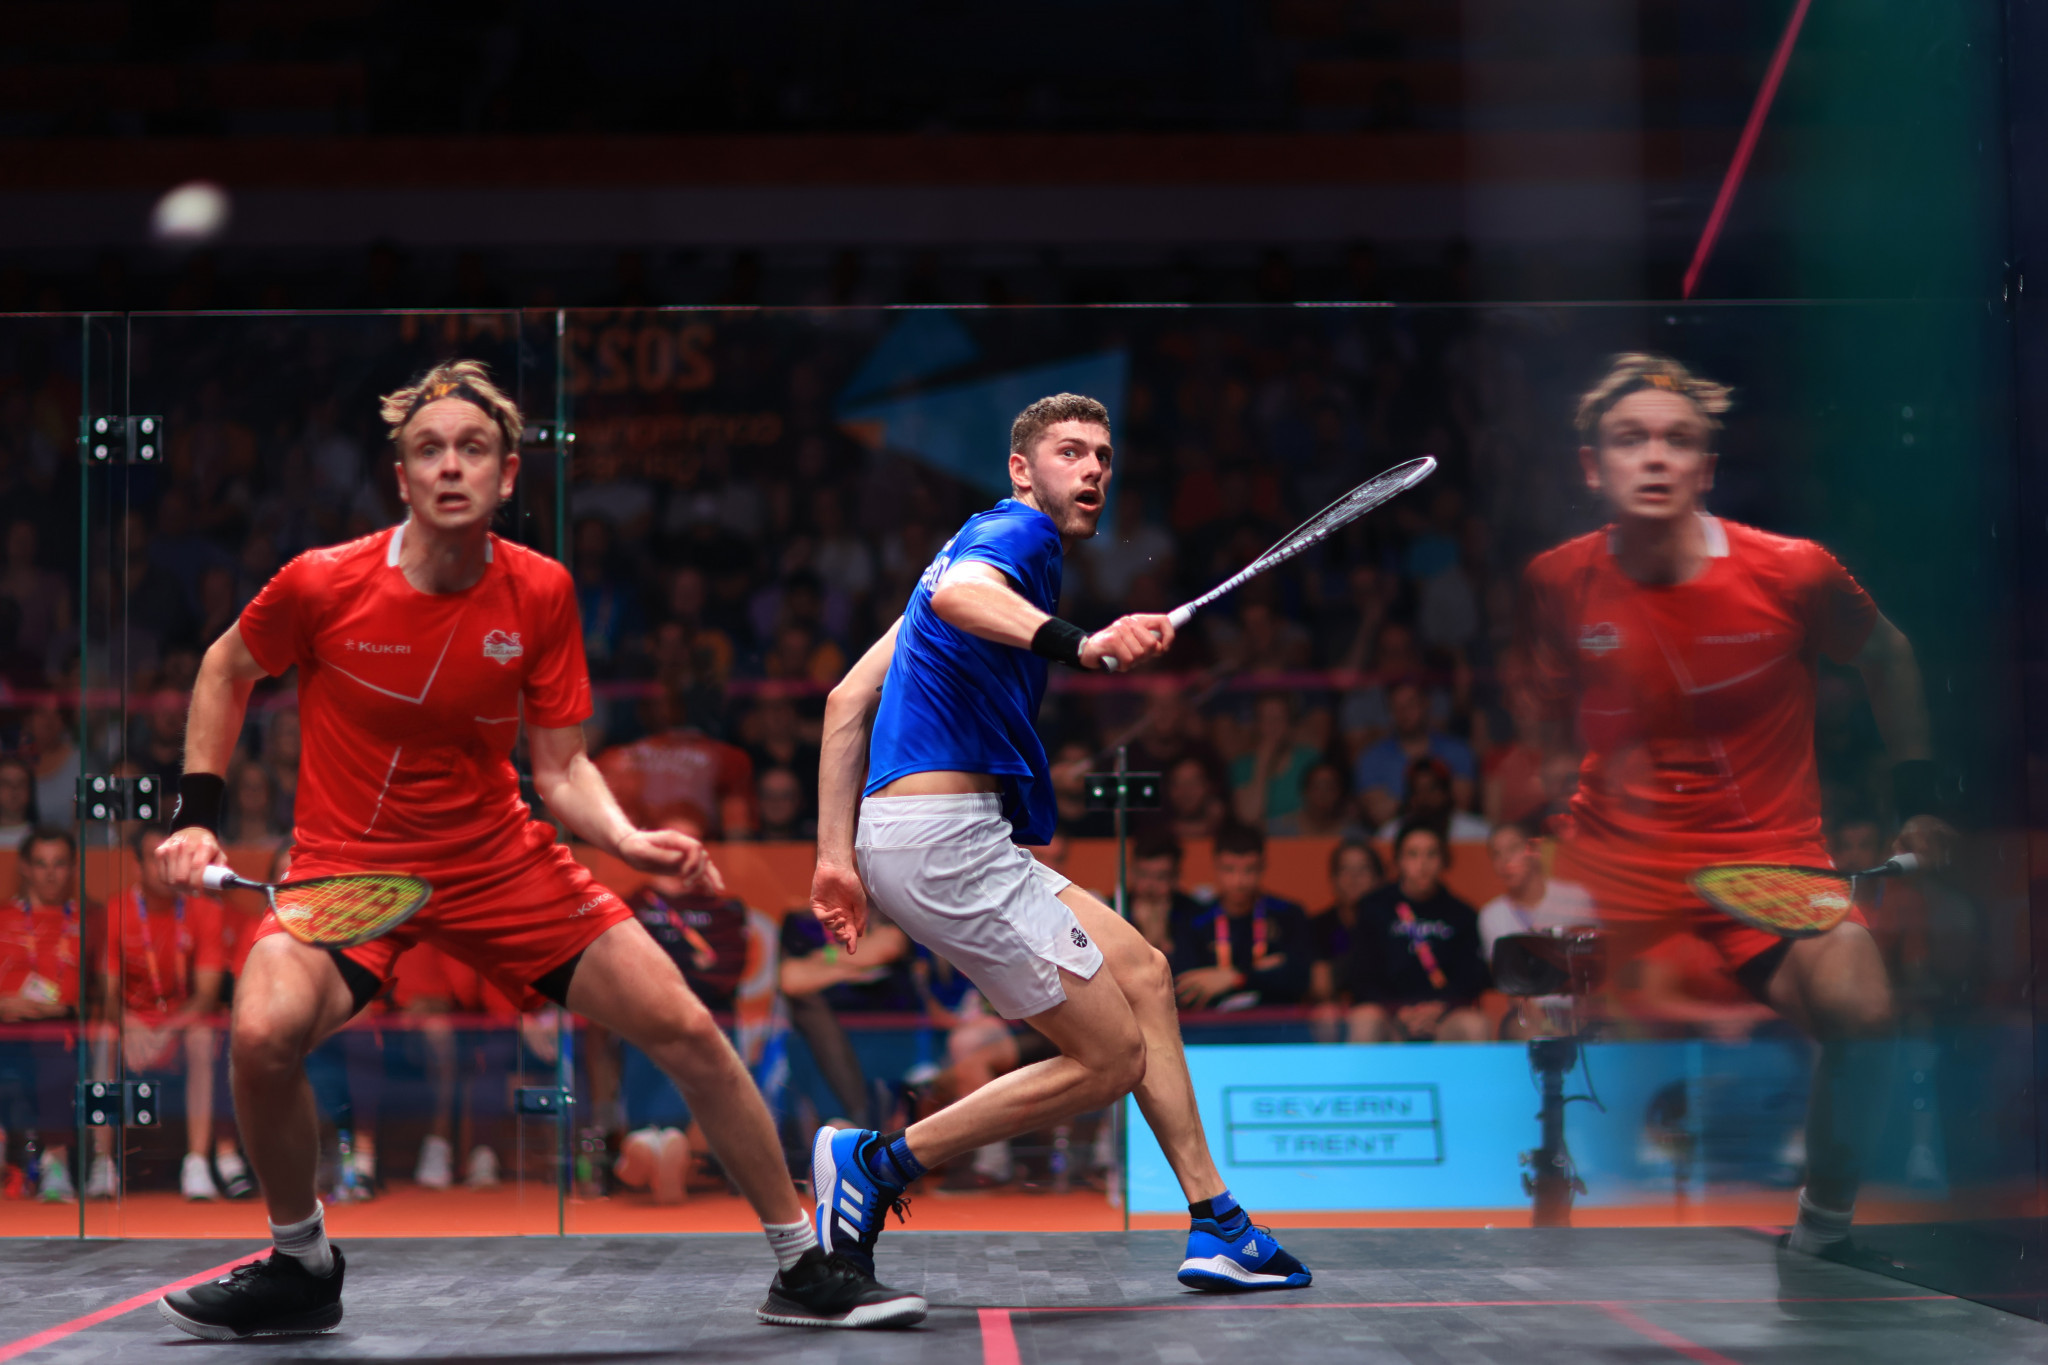 Gold Coast 2018 champion James Willstrop, left, beat Scotland's Rory Stewart in five games to reach the men's singles squash semi-finals ©Getty Images